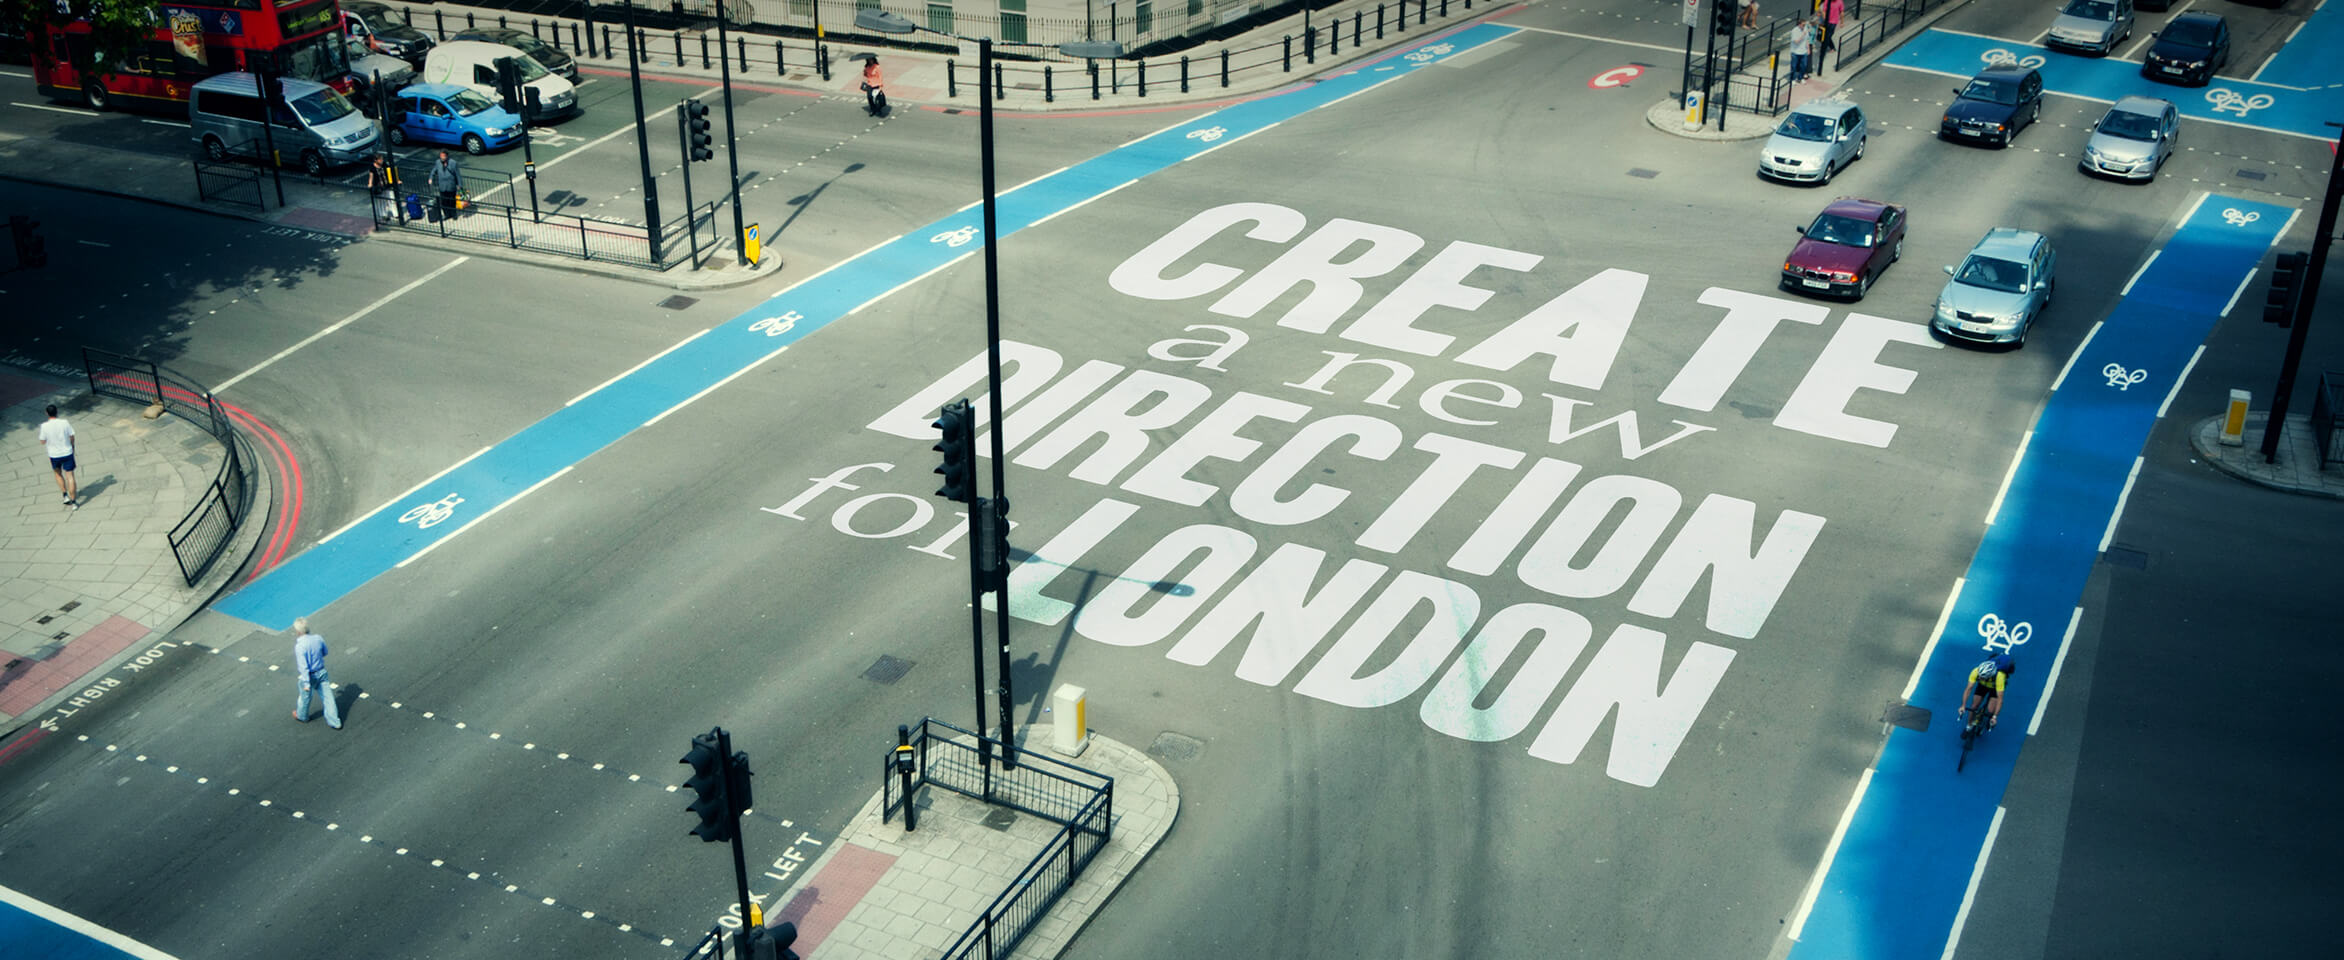 Create a new direction for London